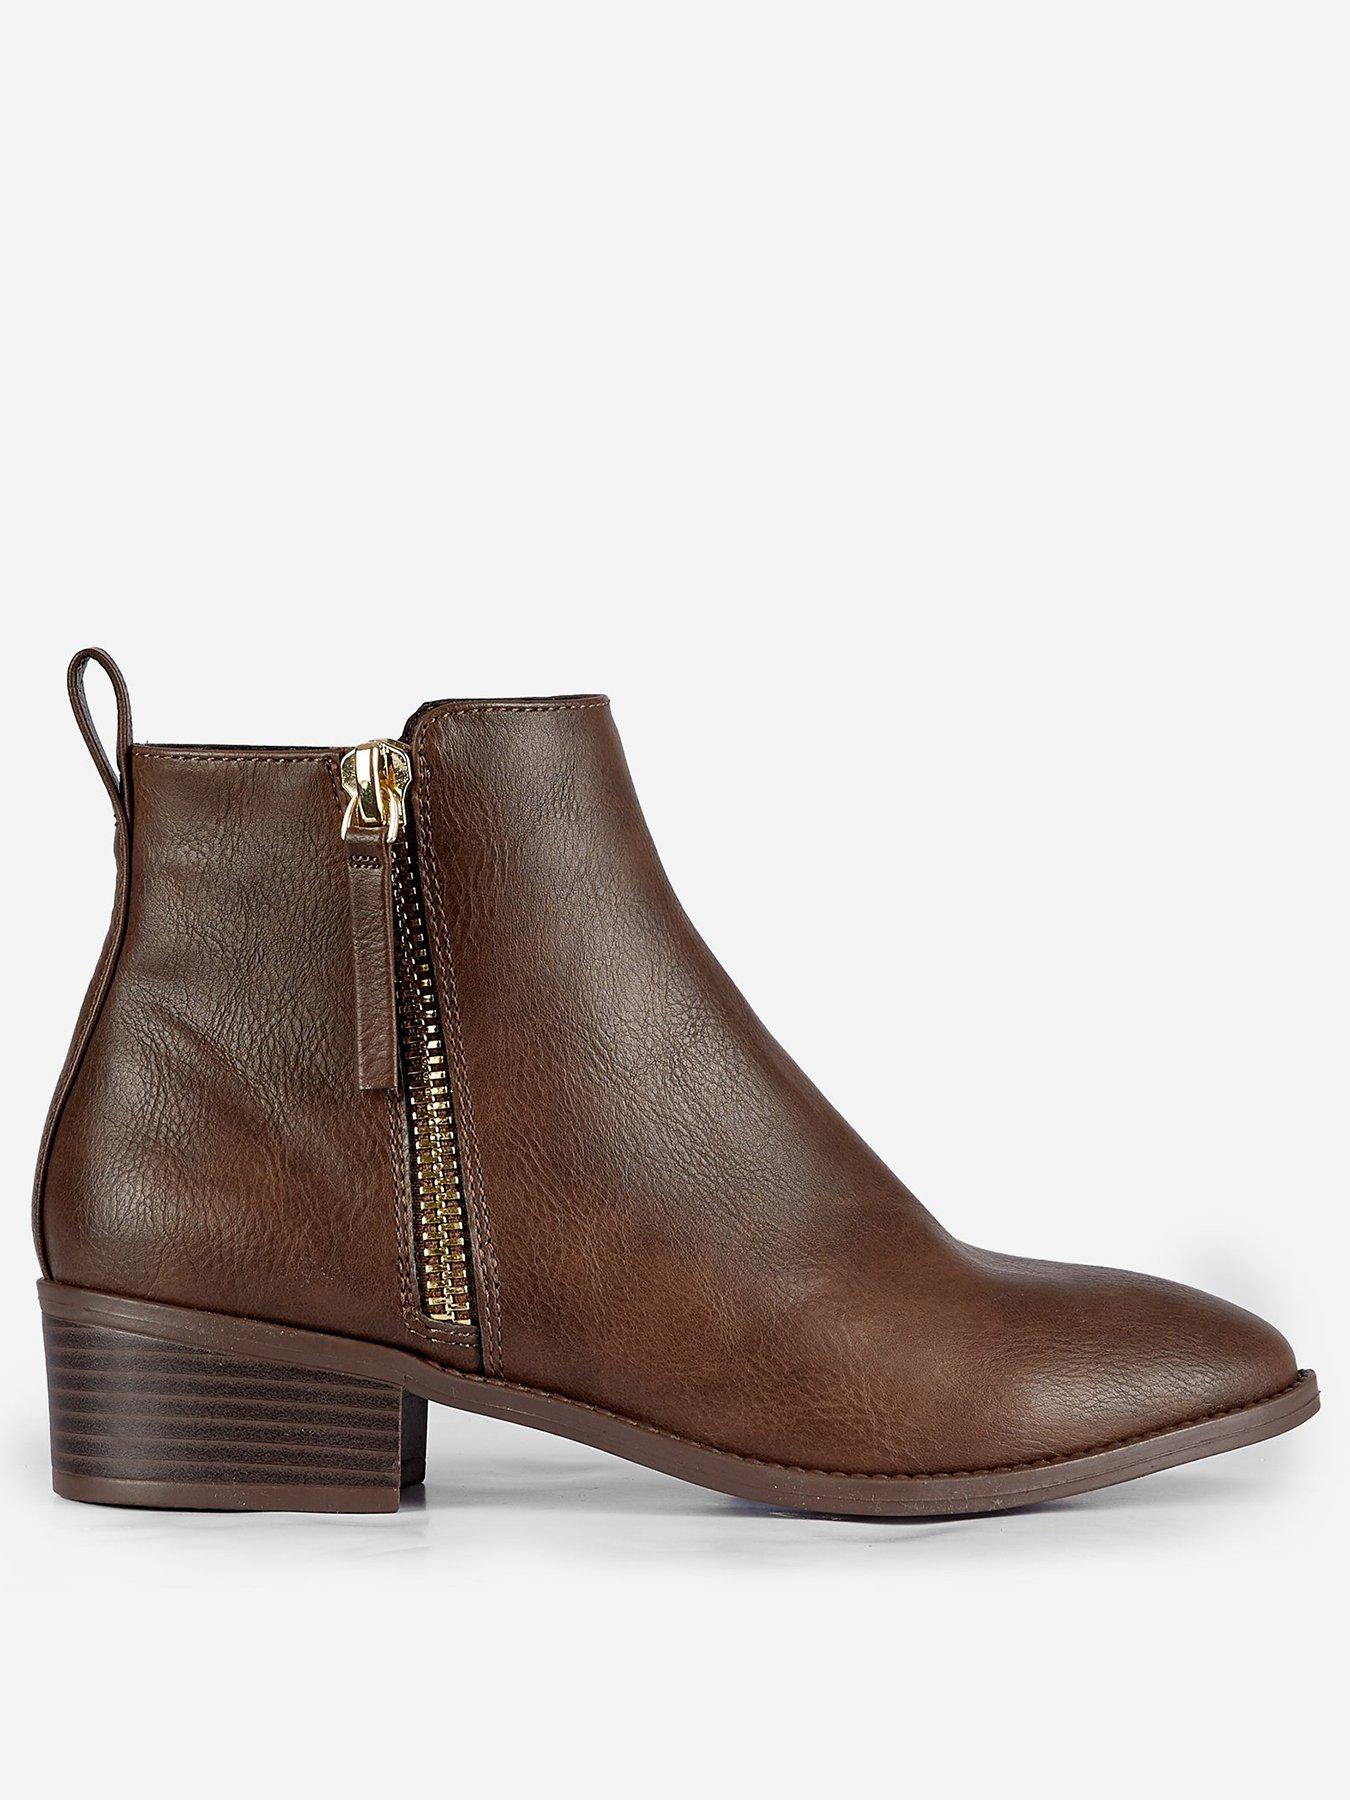 tan ankle boots ireland